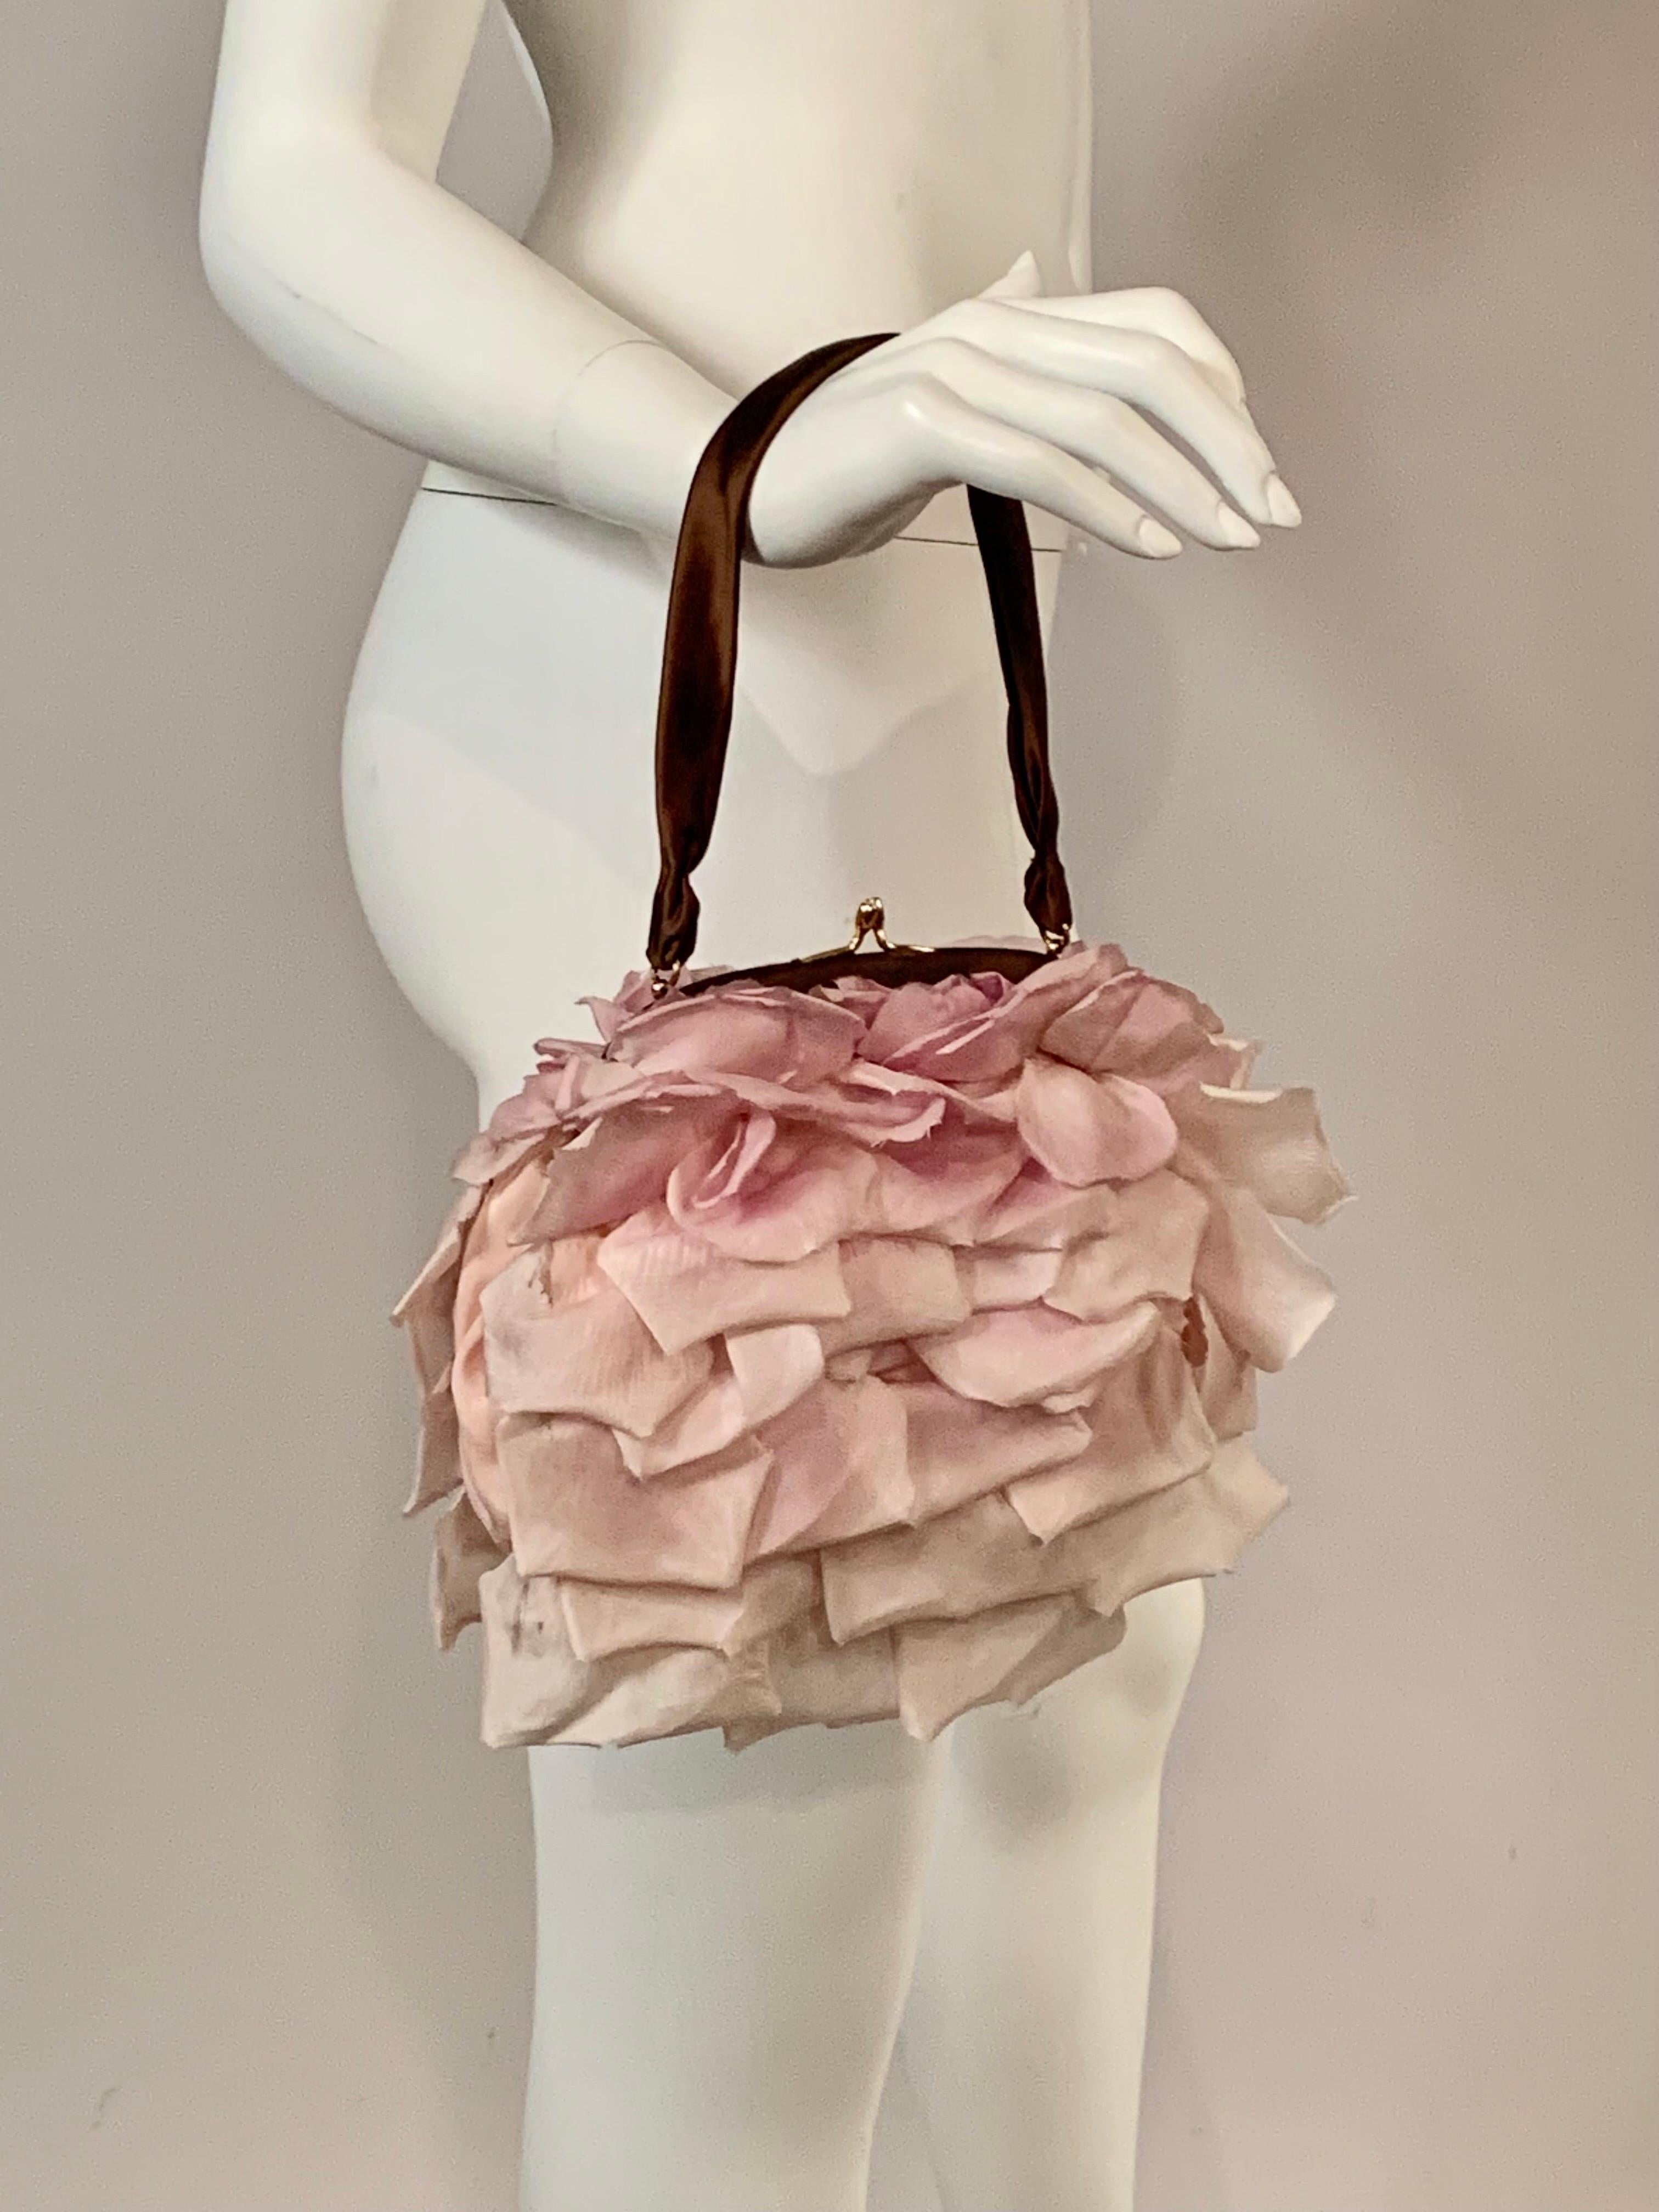 This is such a charming and romantic evening bag, Made in France for Bergdorf Goodman in the 1970's.  The frame and fabric handle are made from deep green satin, the color of a rose stem or leaves.  The bag is covered front and back with silk rose